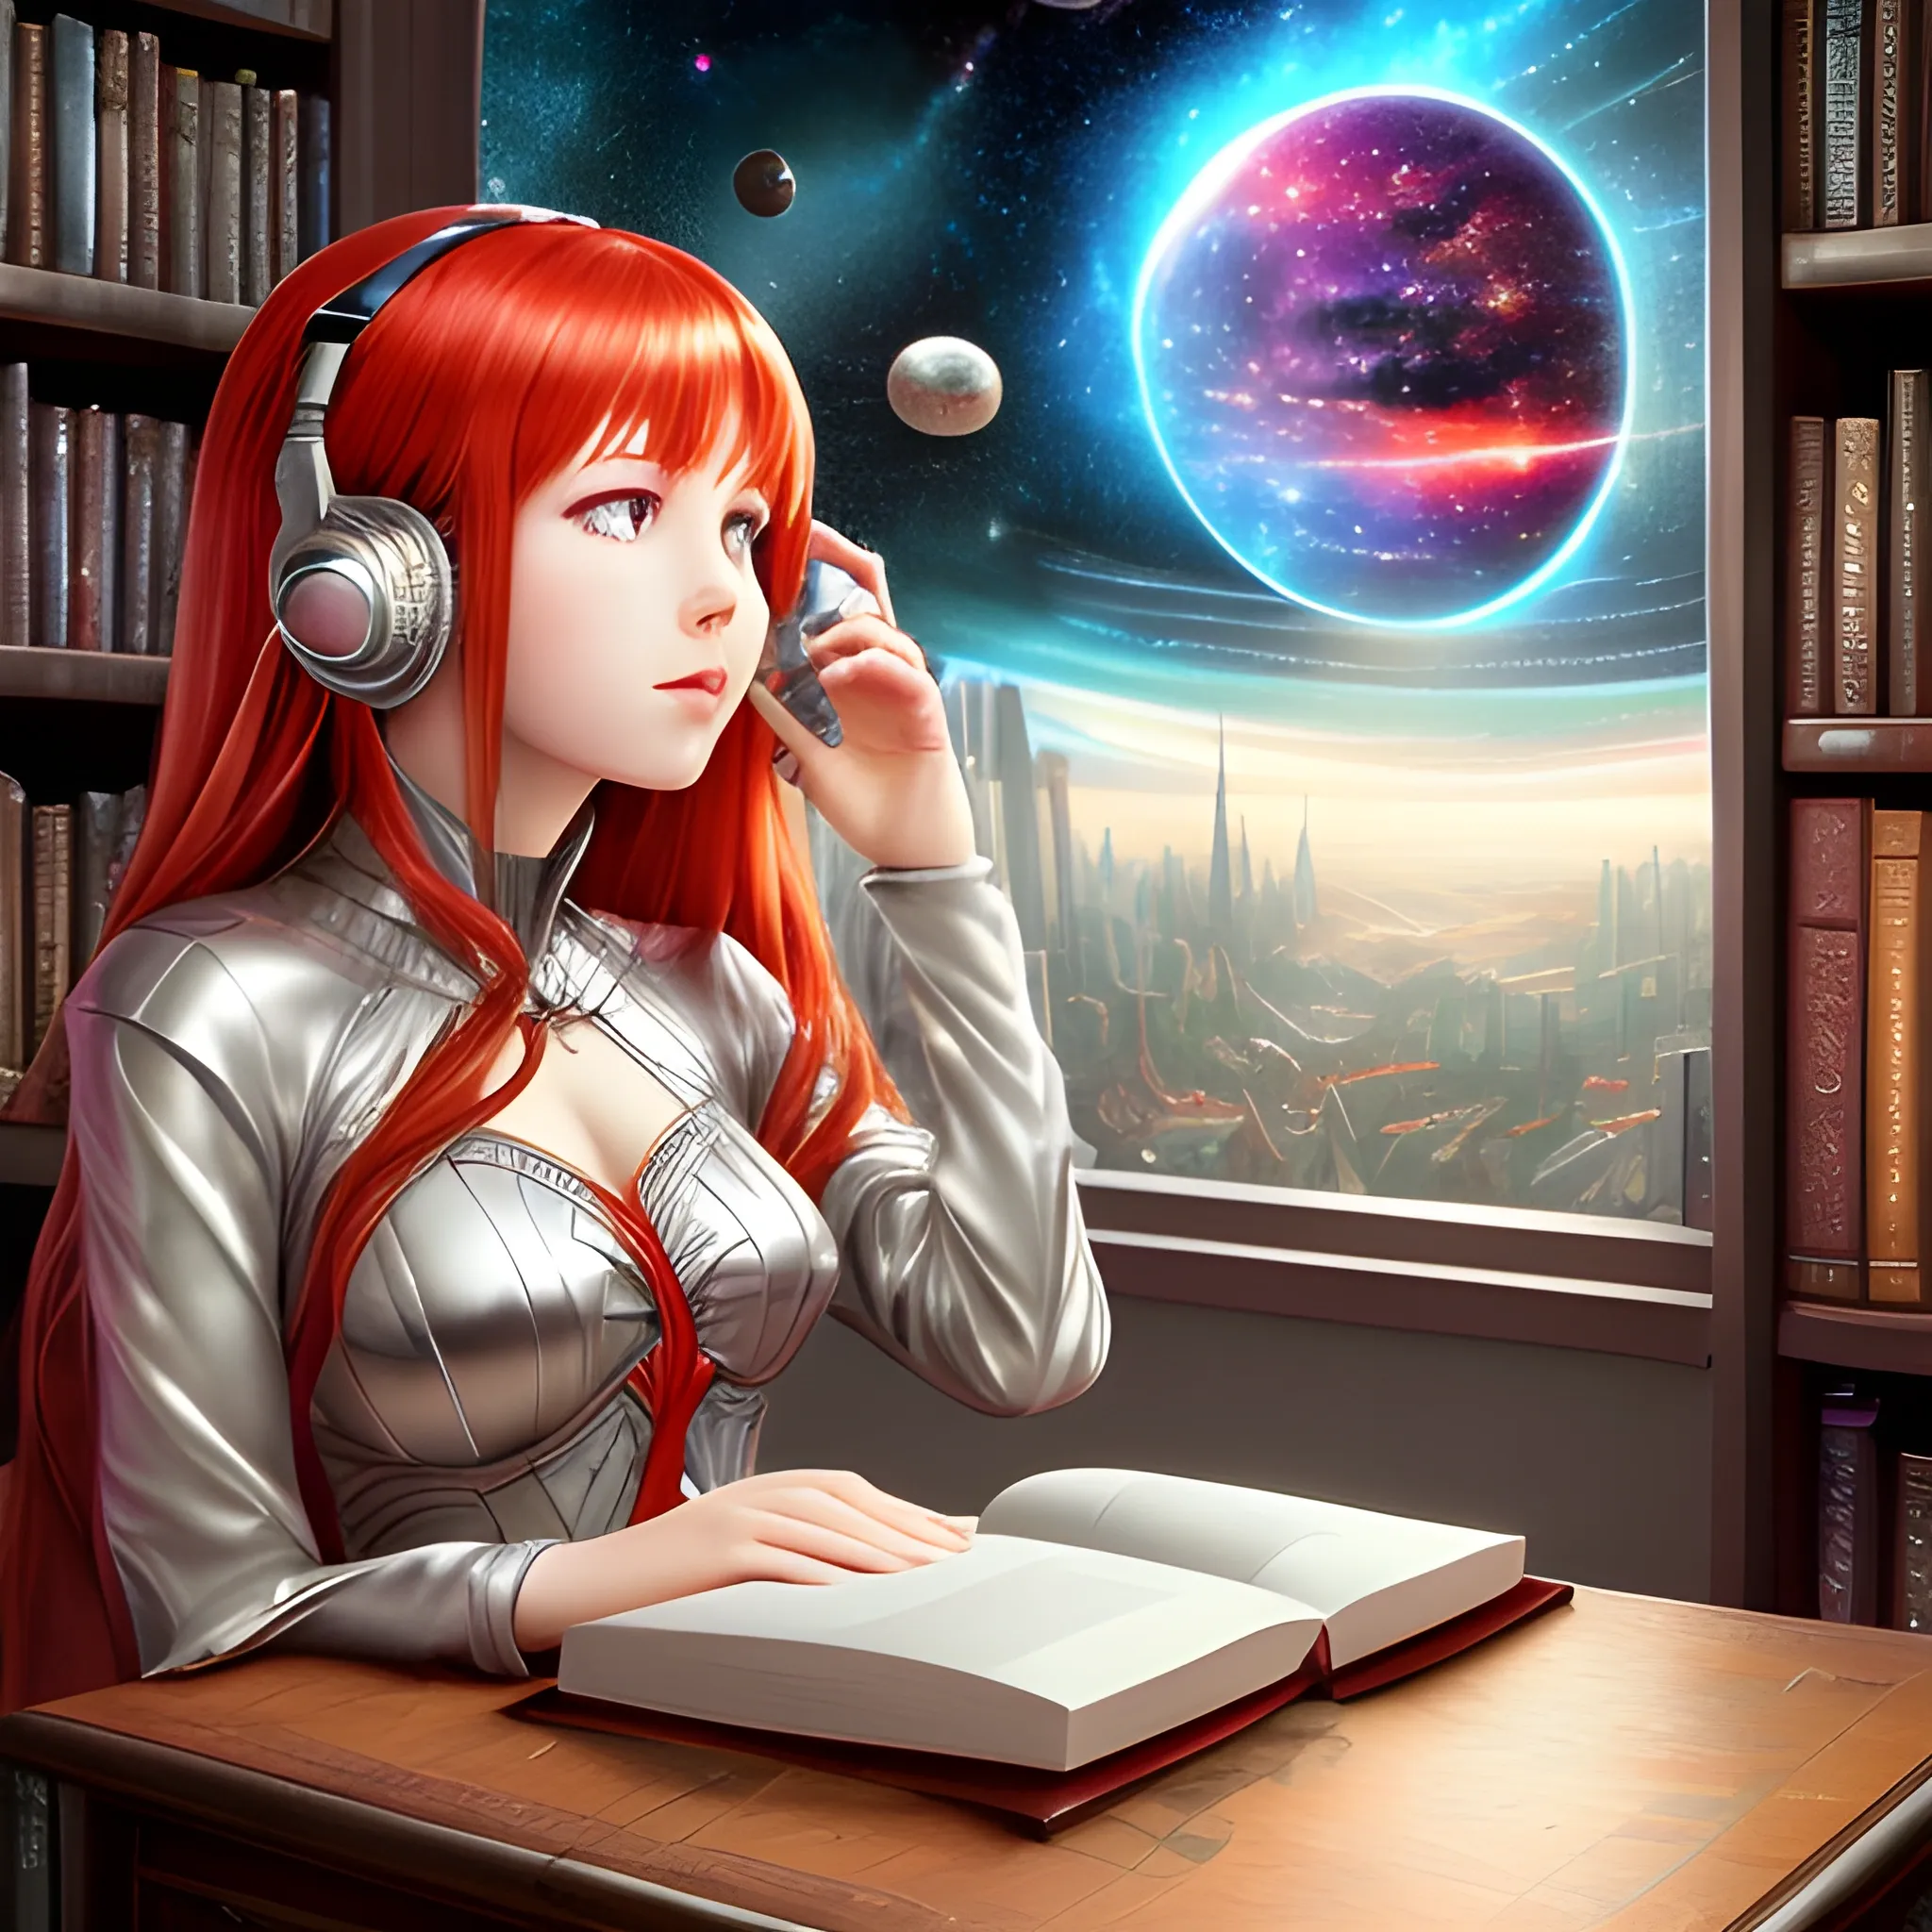 (((high detail))), best quality, (detailed), (high resolution) silver universe, books, books on a table, shelf with some books, studio ghiblin, anime, galaxy in the sky, woman reading a book ,red hair, red dress , black eyes, listen to music 
 
, Trippy, 
